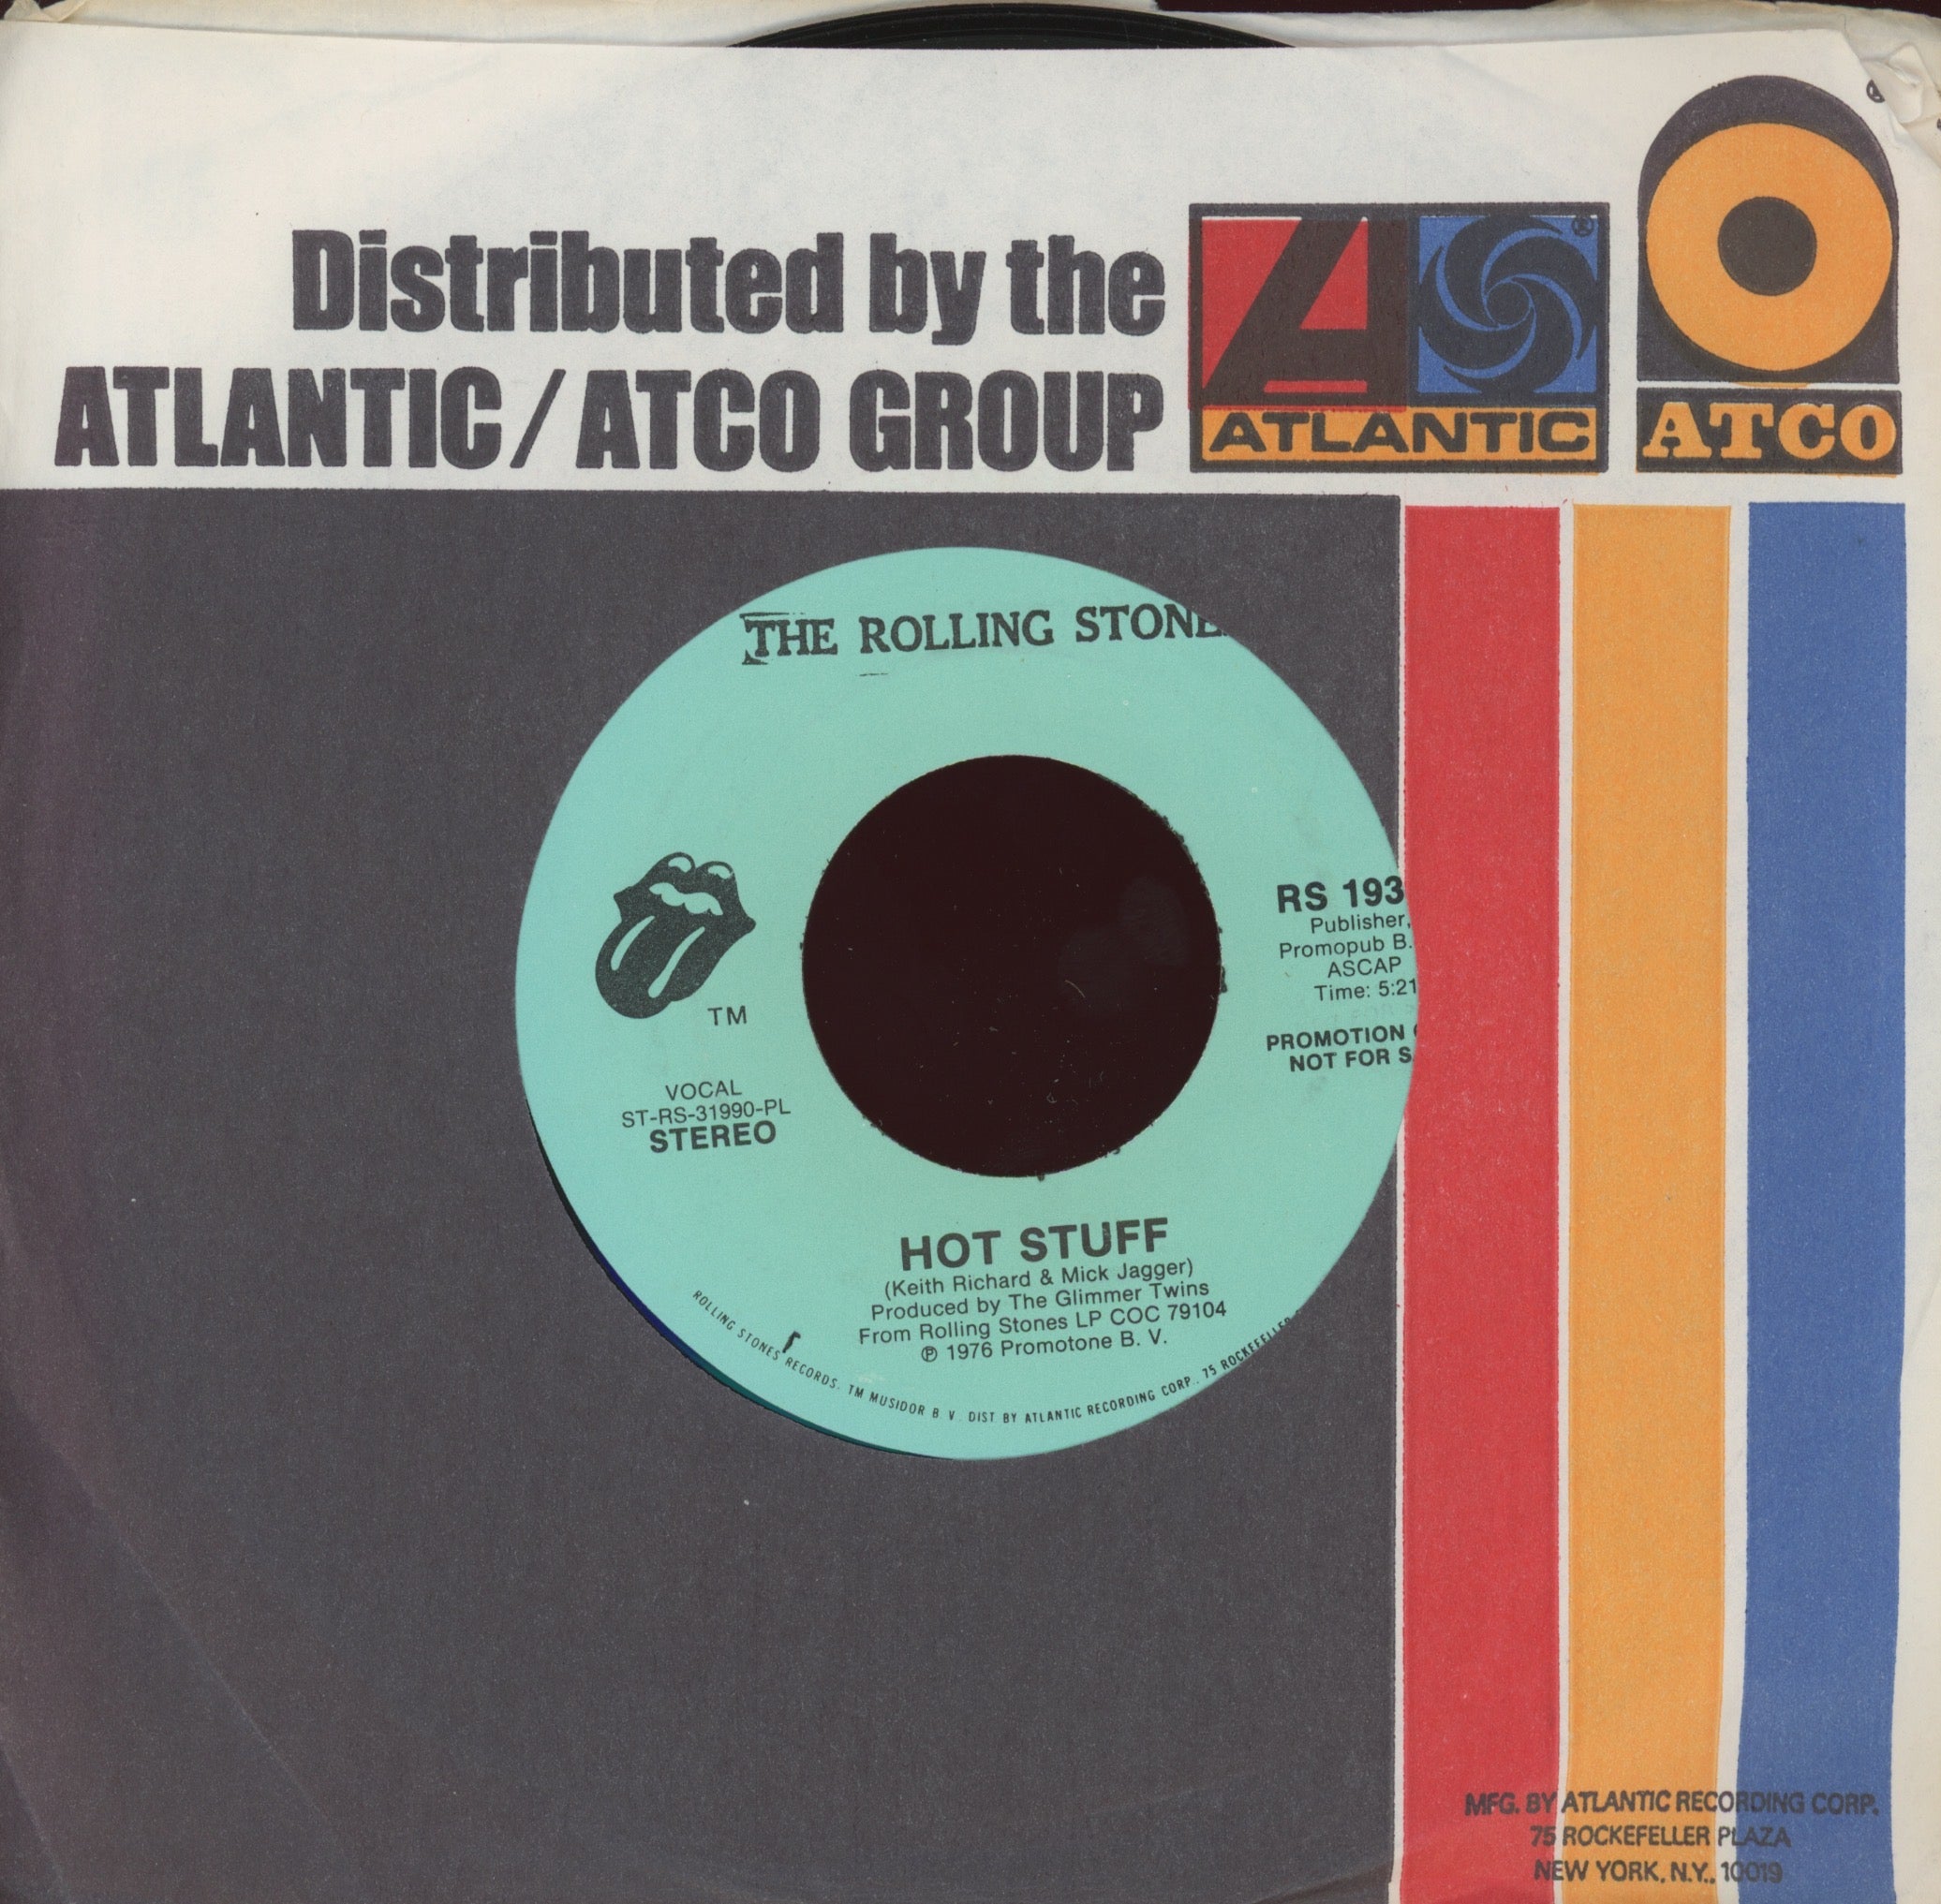 The Rolling Stones - Hot Stuff on Rolling Stones Records Promo Rock 45